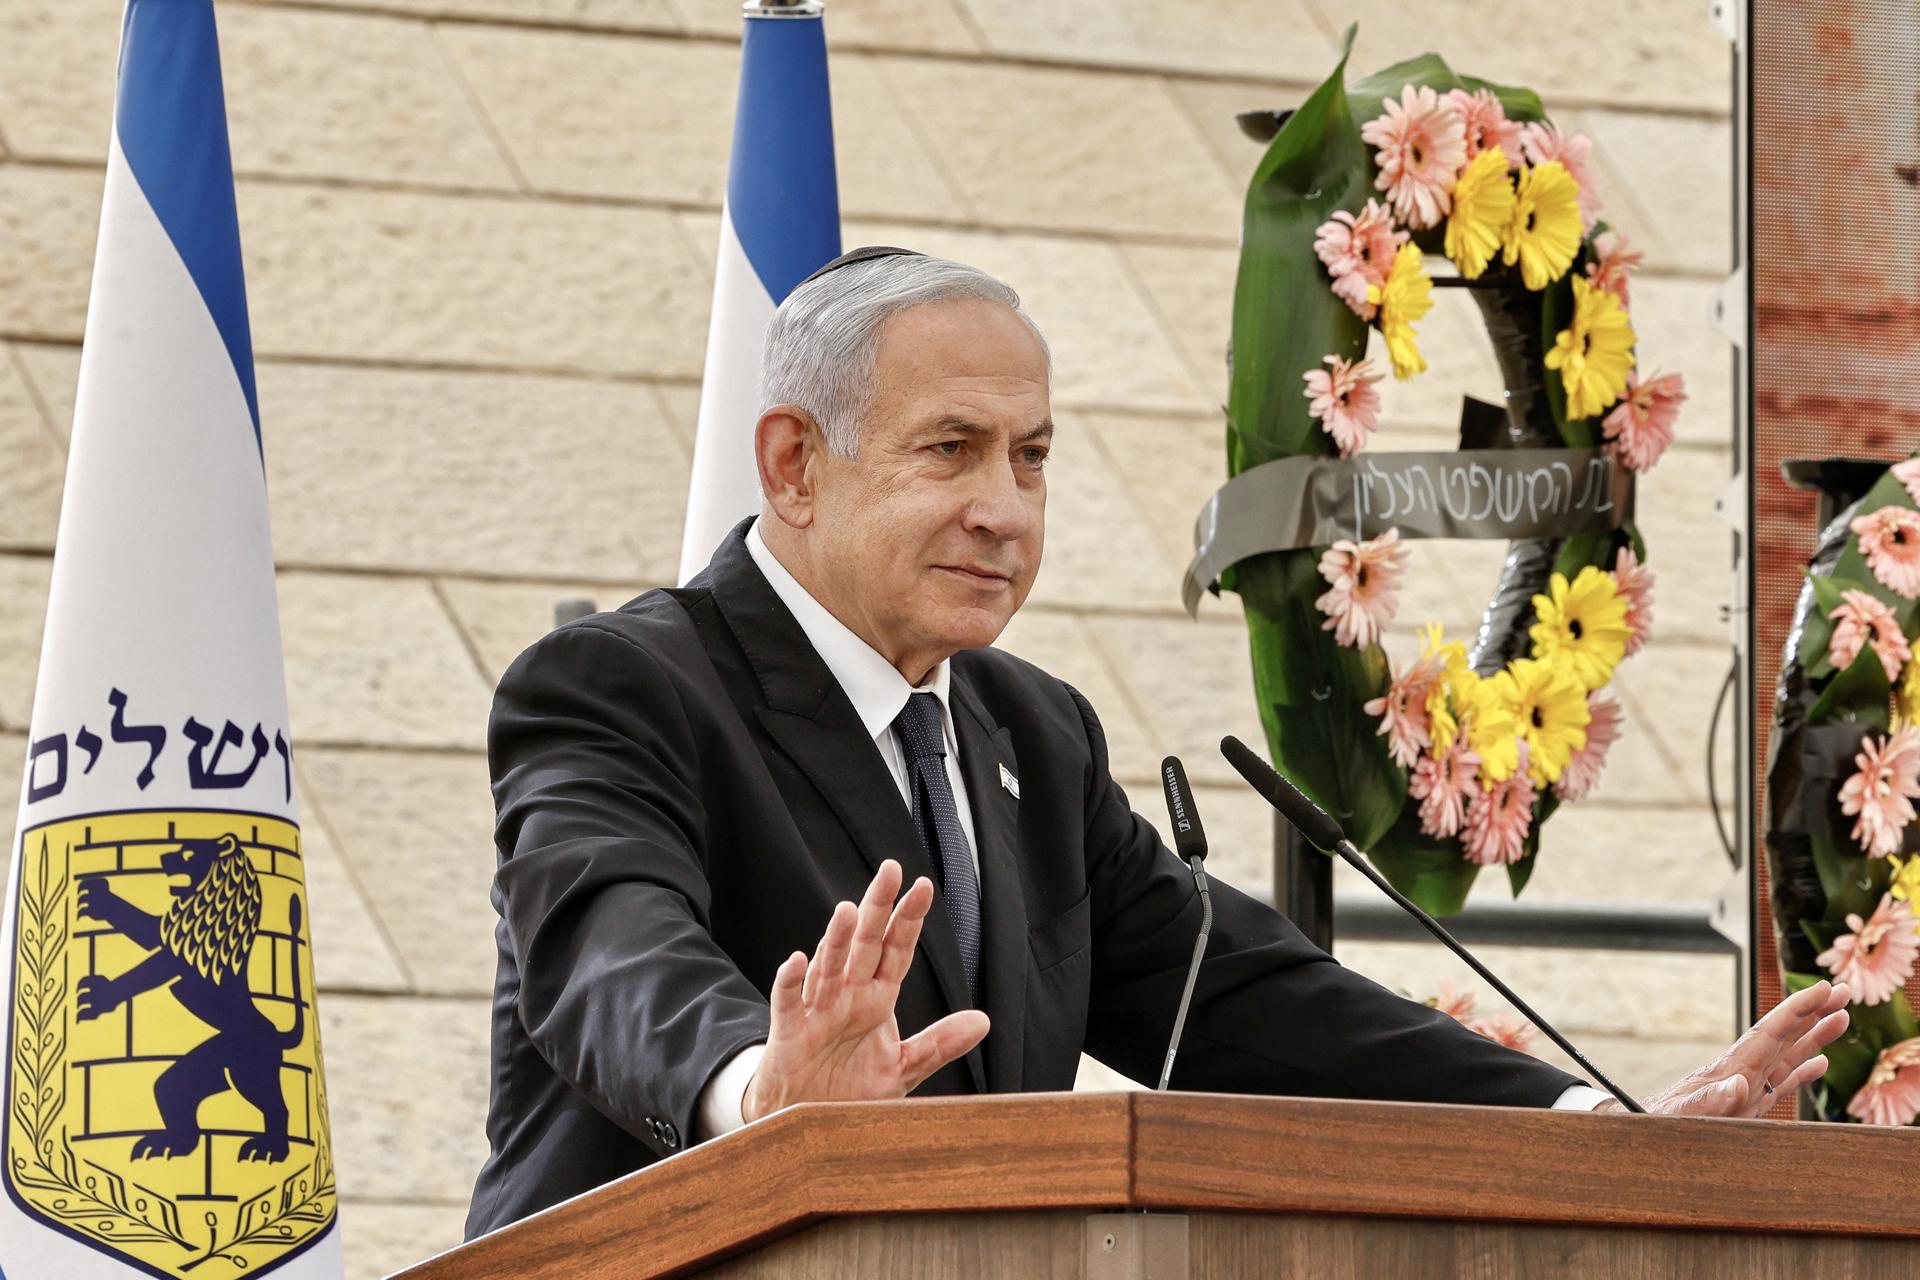 Israel's Prime Minister Benjamin Netanyahu gives a speech during the annual ceremony for Remembrance Day for fallen soldiers (Yom HaZikaron) at the Yad LaBanim Memorial in Jerusalem, 24 April 2023. EFE/EPA/MARC ISRAEL SELLEM